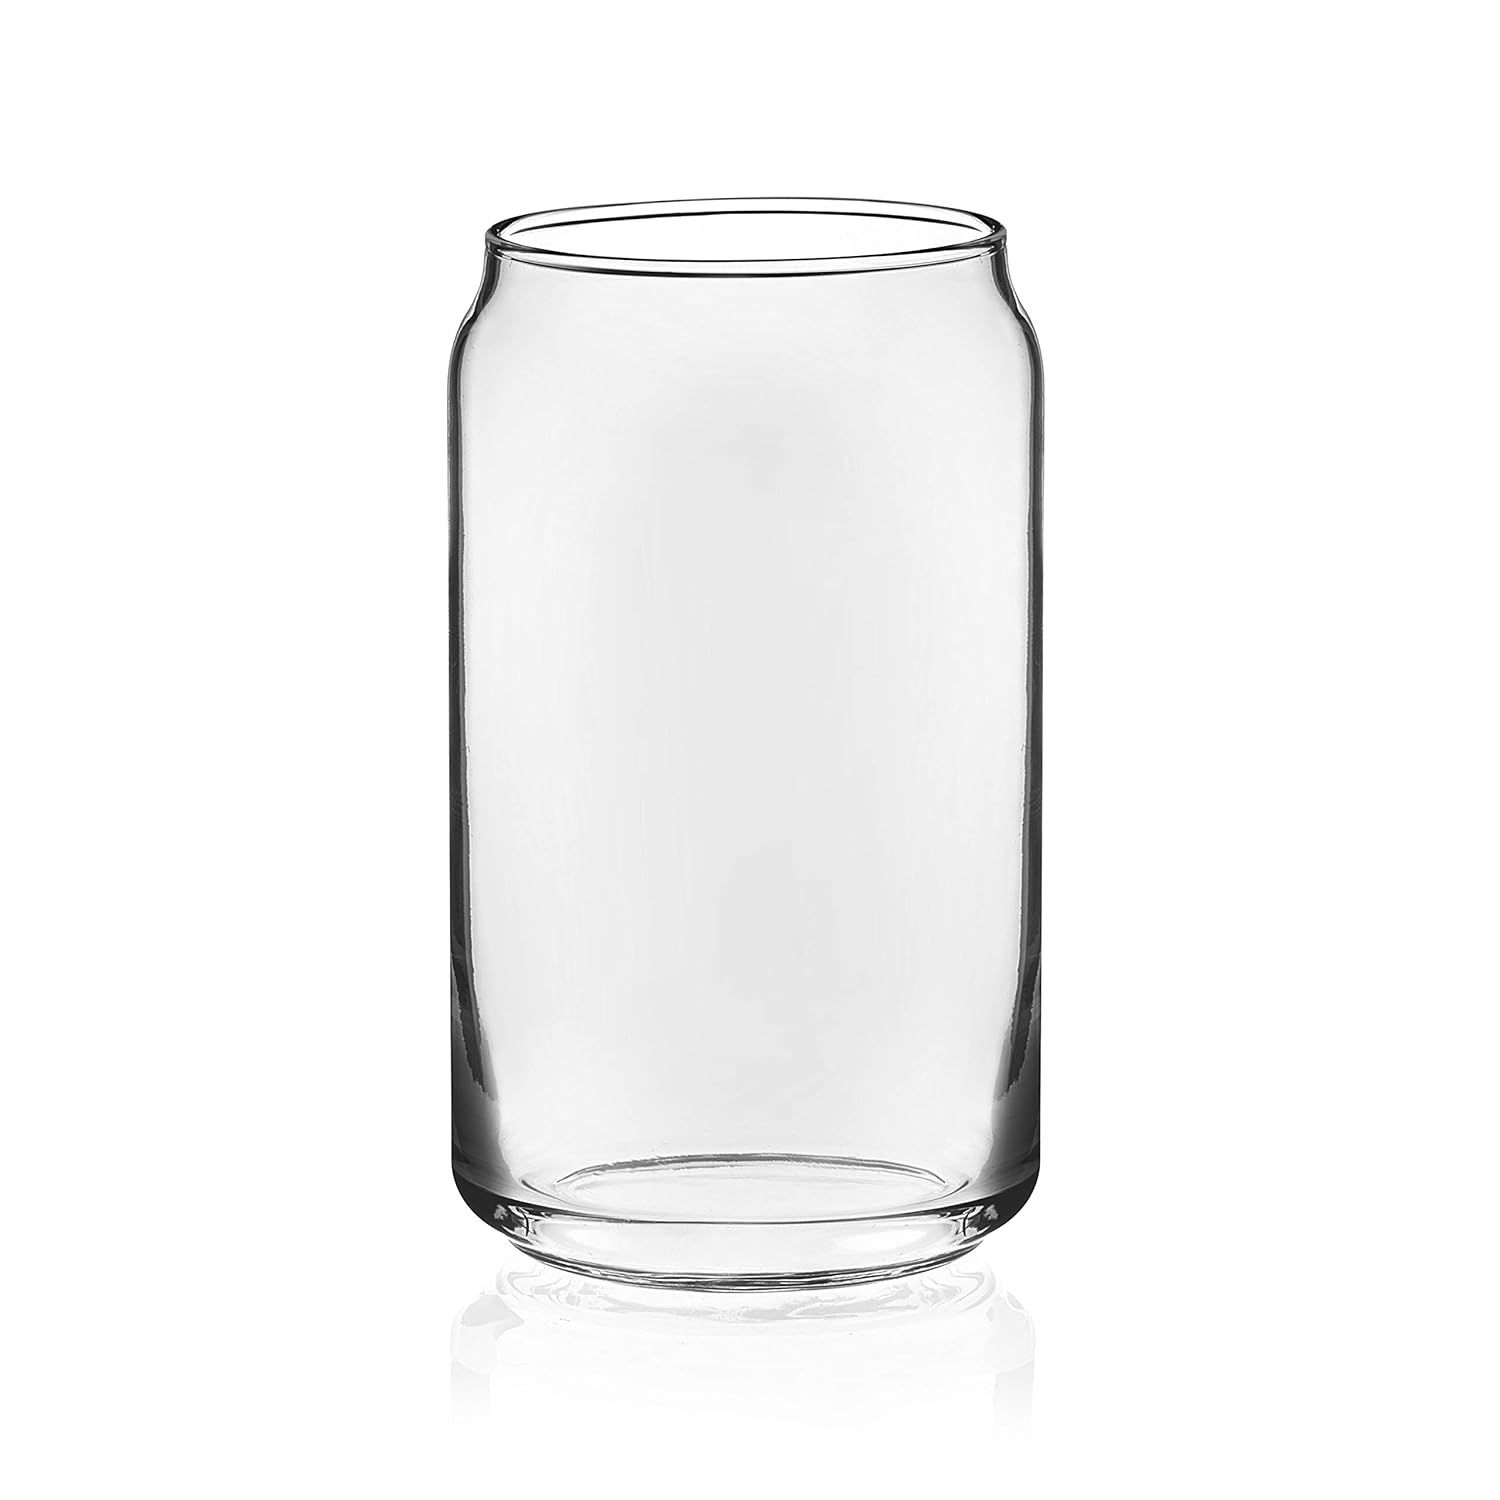 Libbey Classic Can Tumbler Glasses, Set of 4, Pack of 4, Clear | Amazon (US)